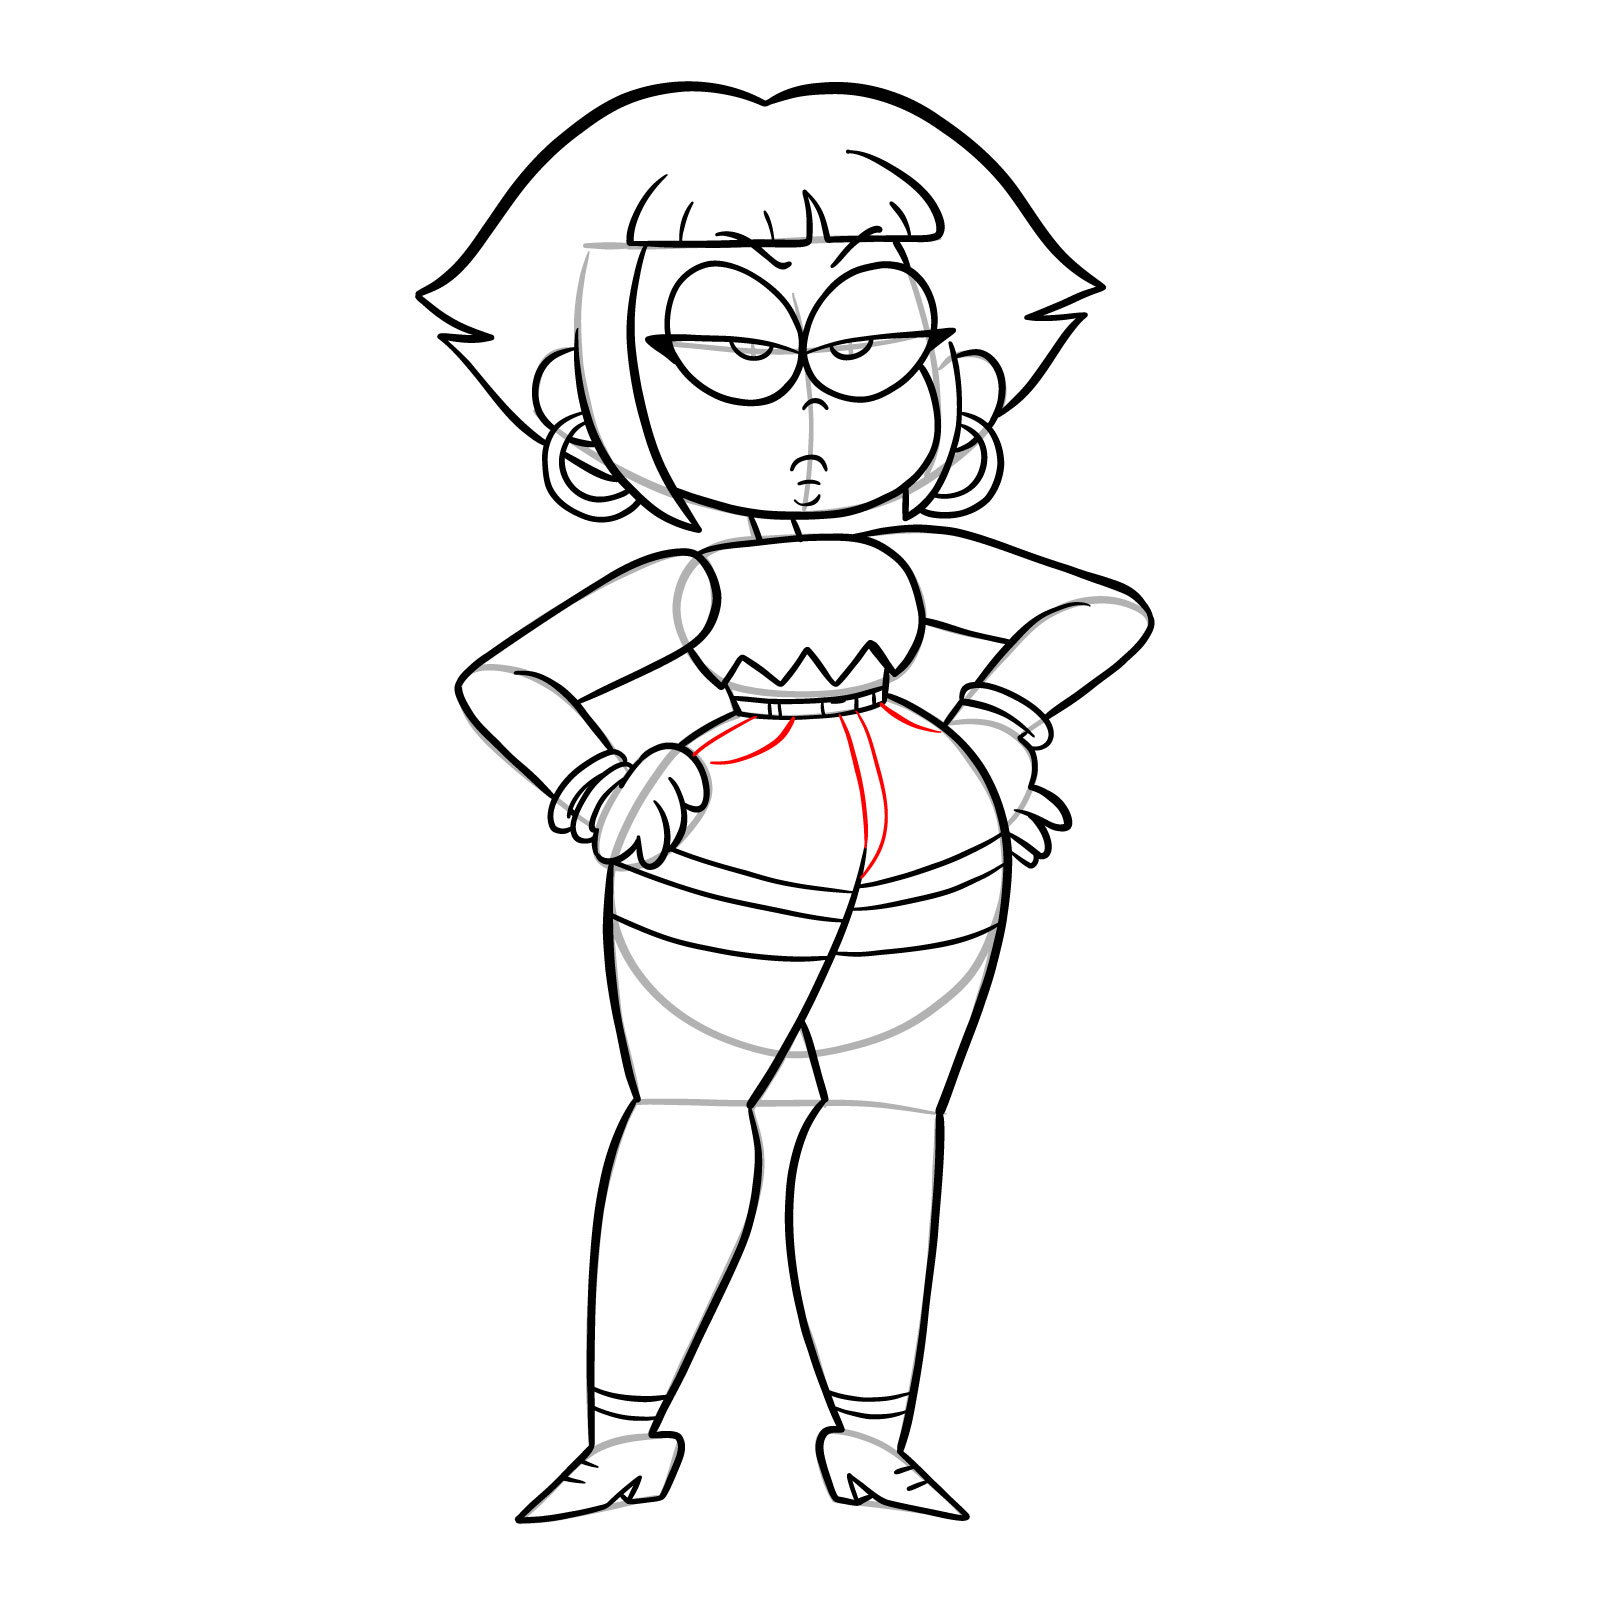 How to draw Human Shannon from OK K.O.! - step 30